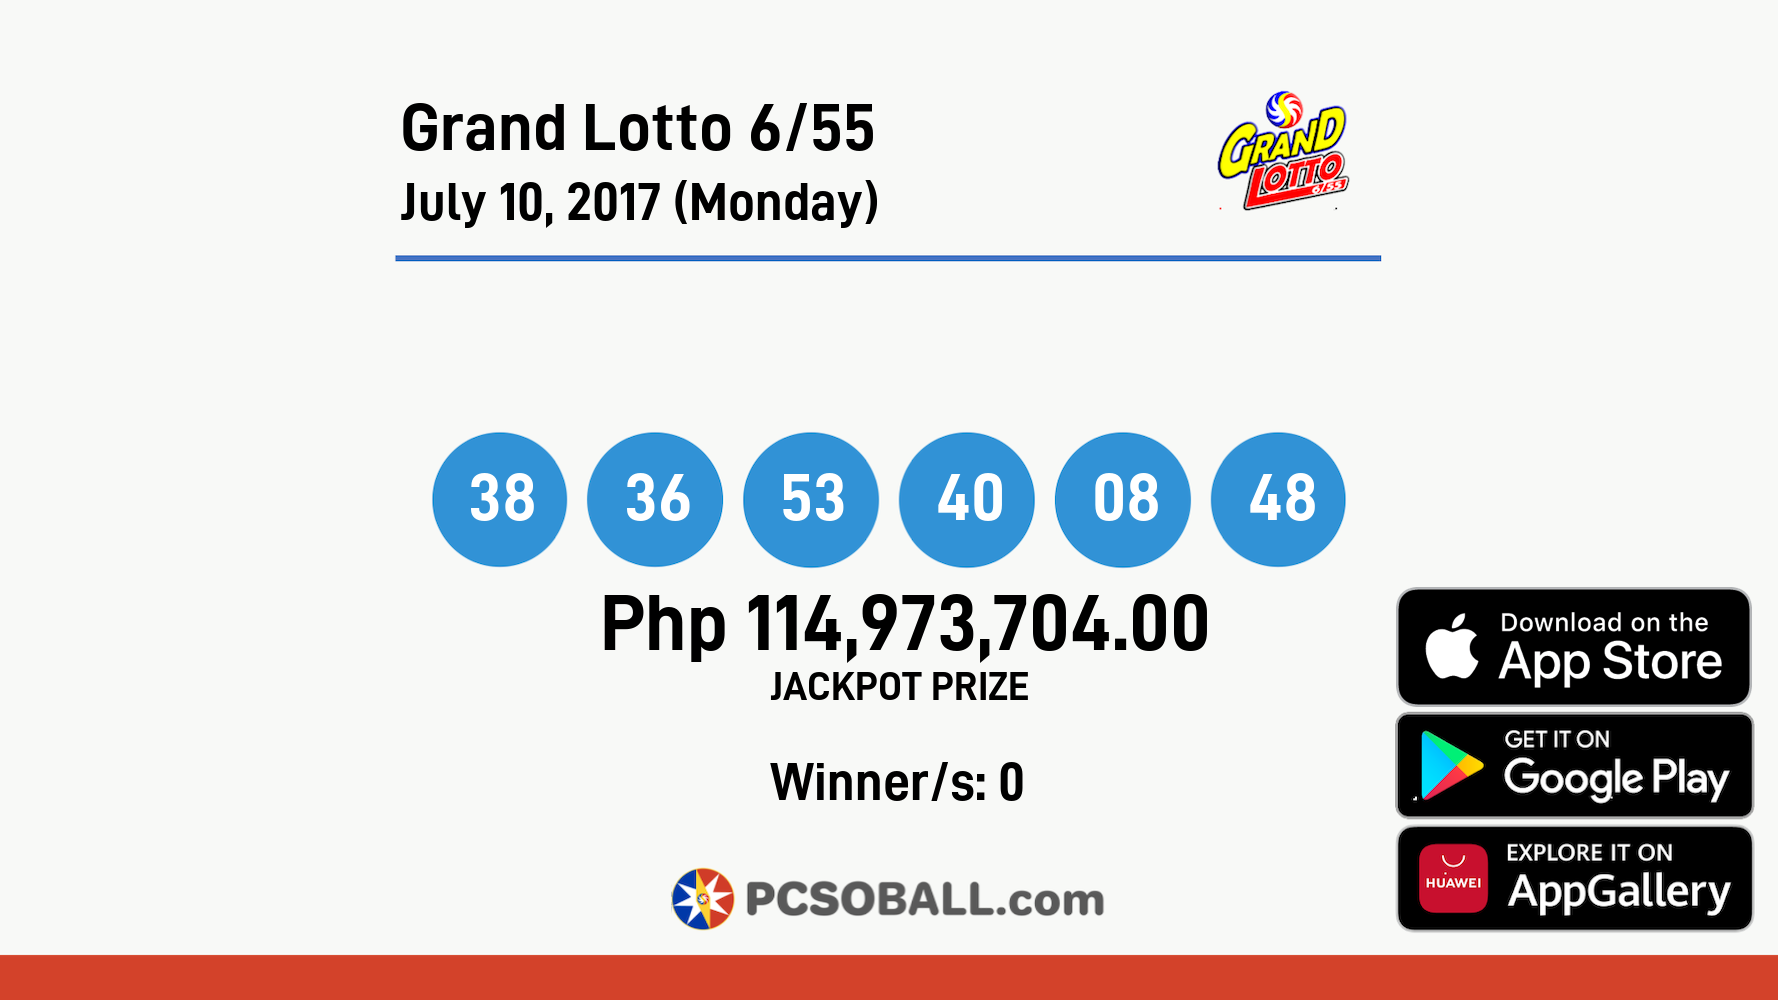 Grand Lotto 6/55 July 10, 2017 (Monday) Result